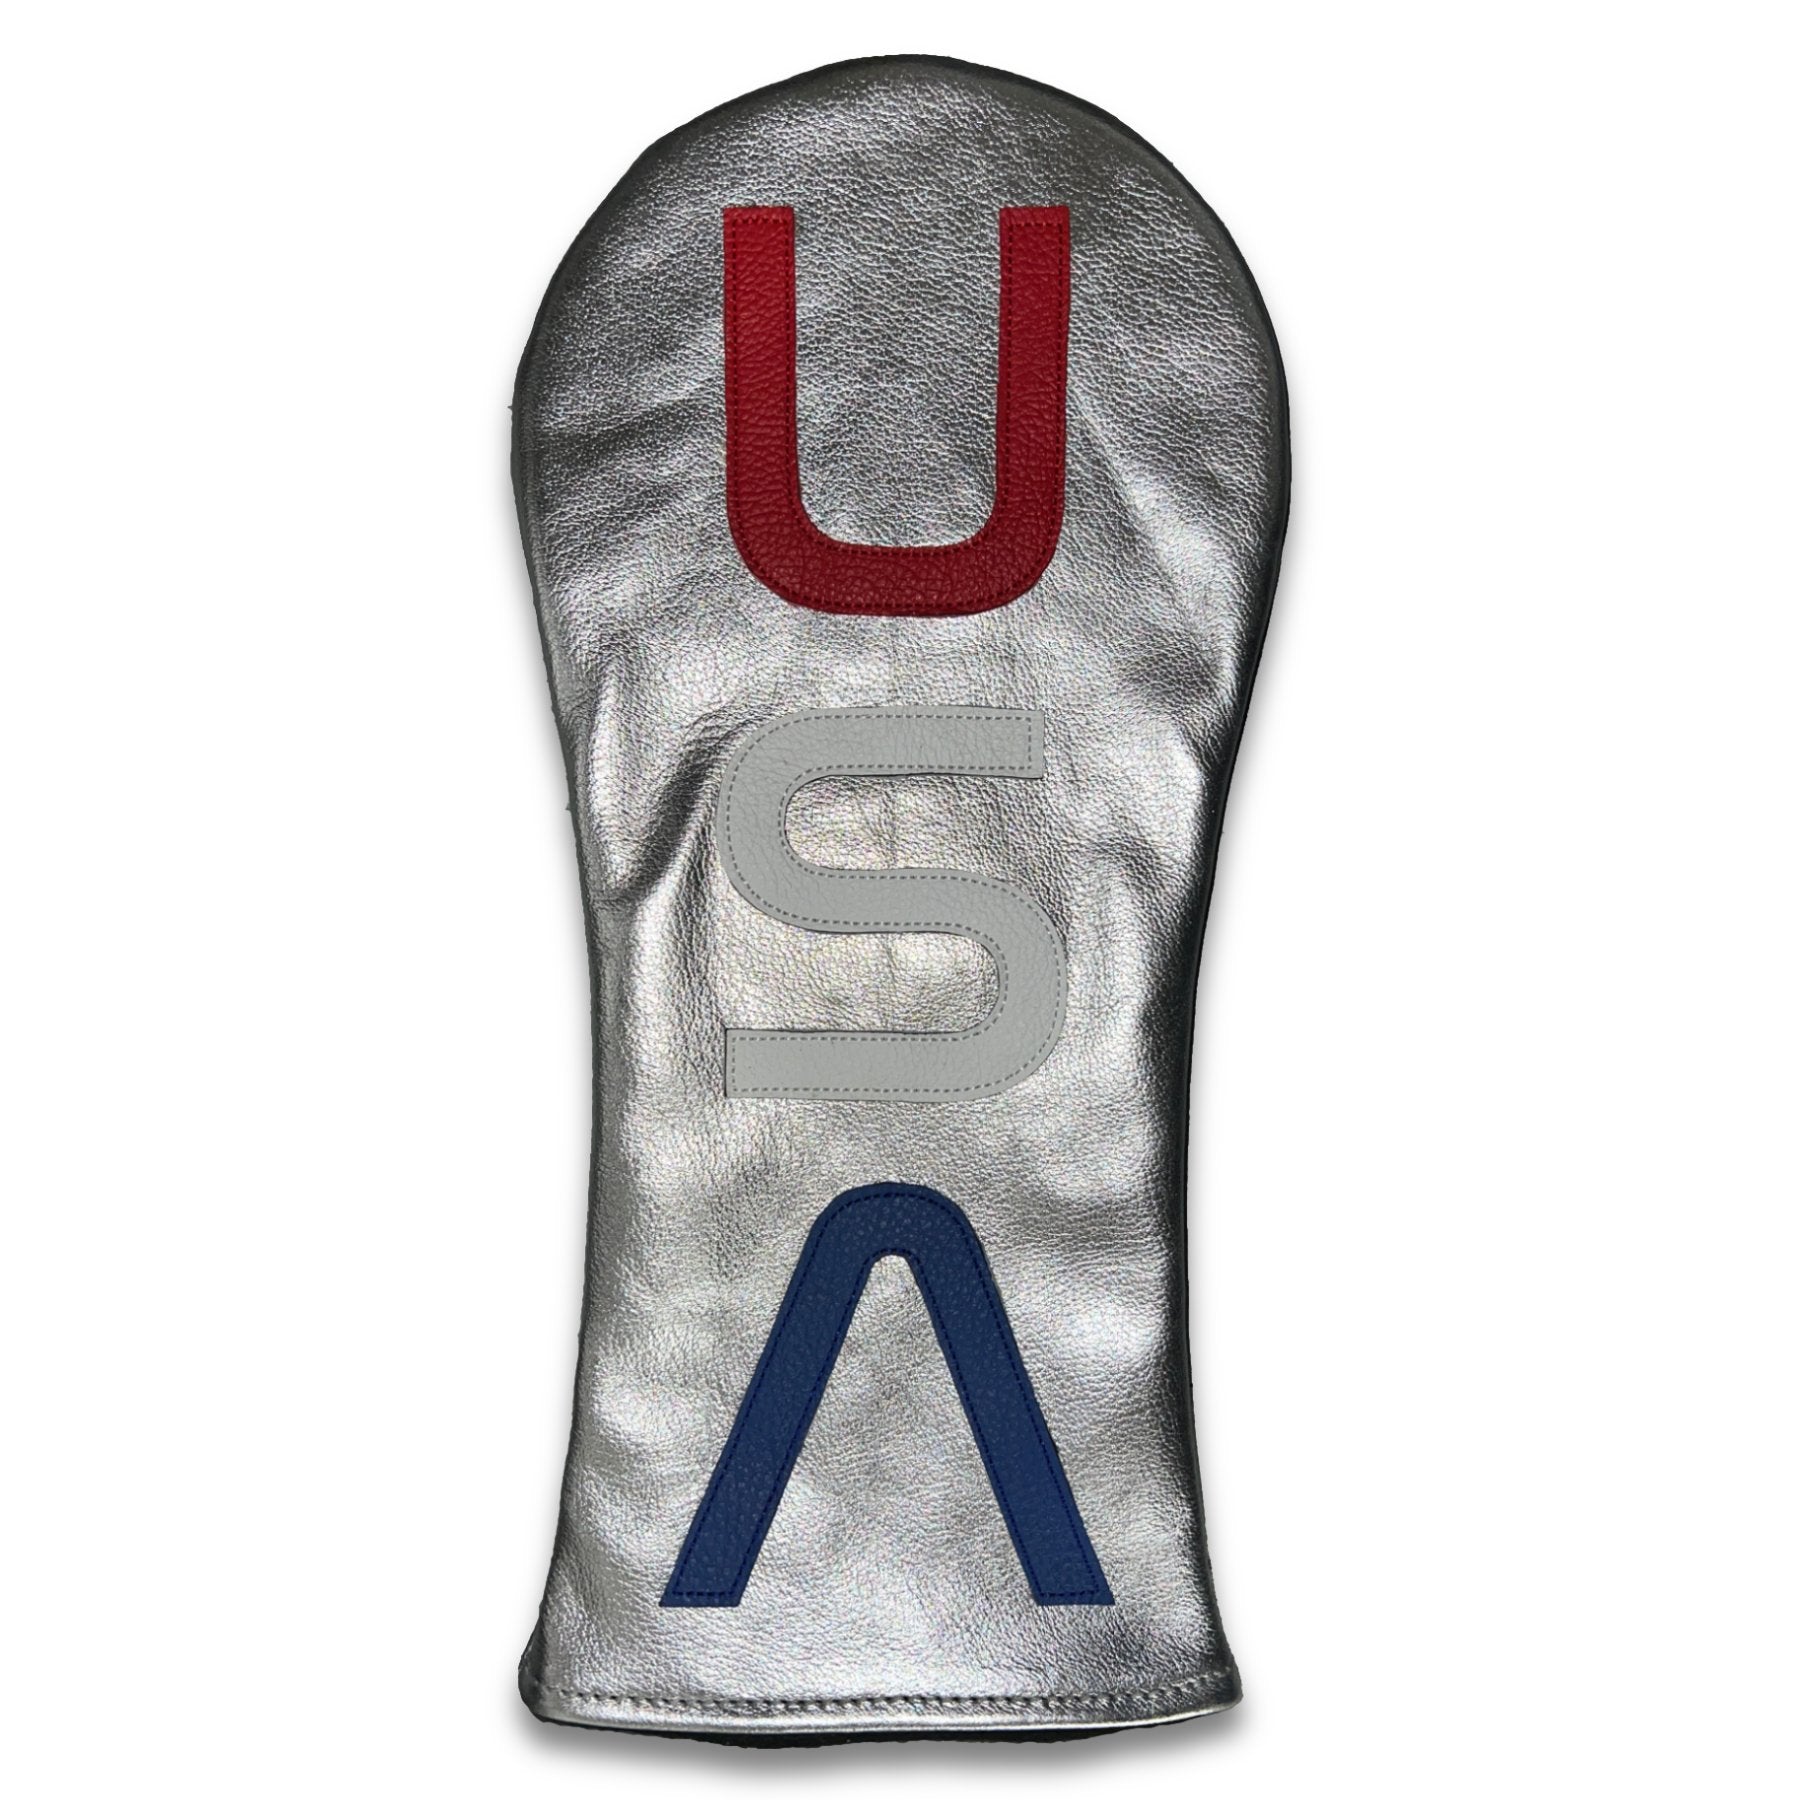 Spaceman Leather Headcover - Driver - -